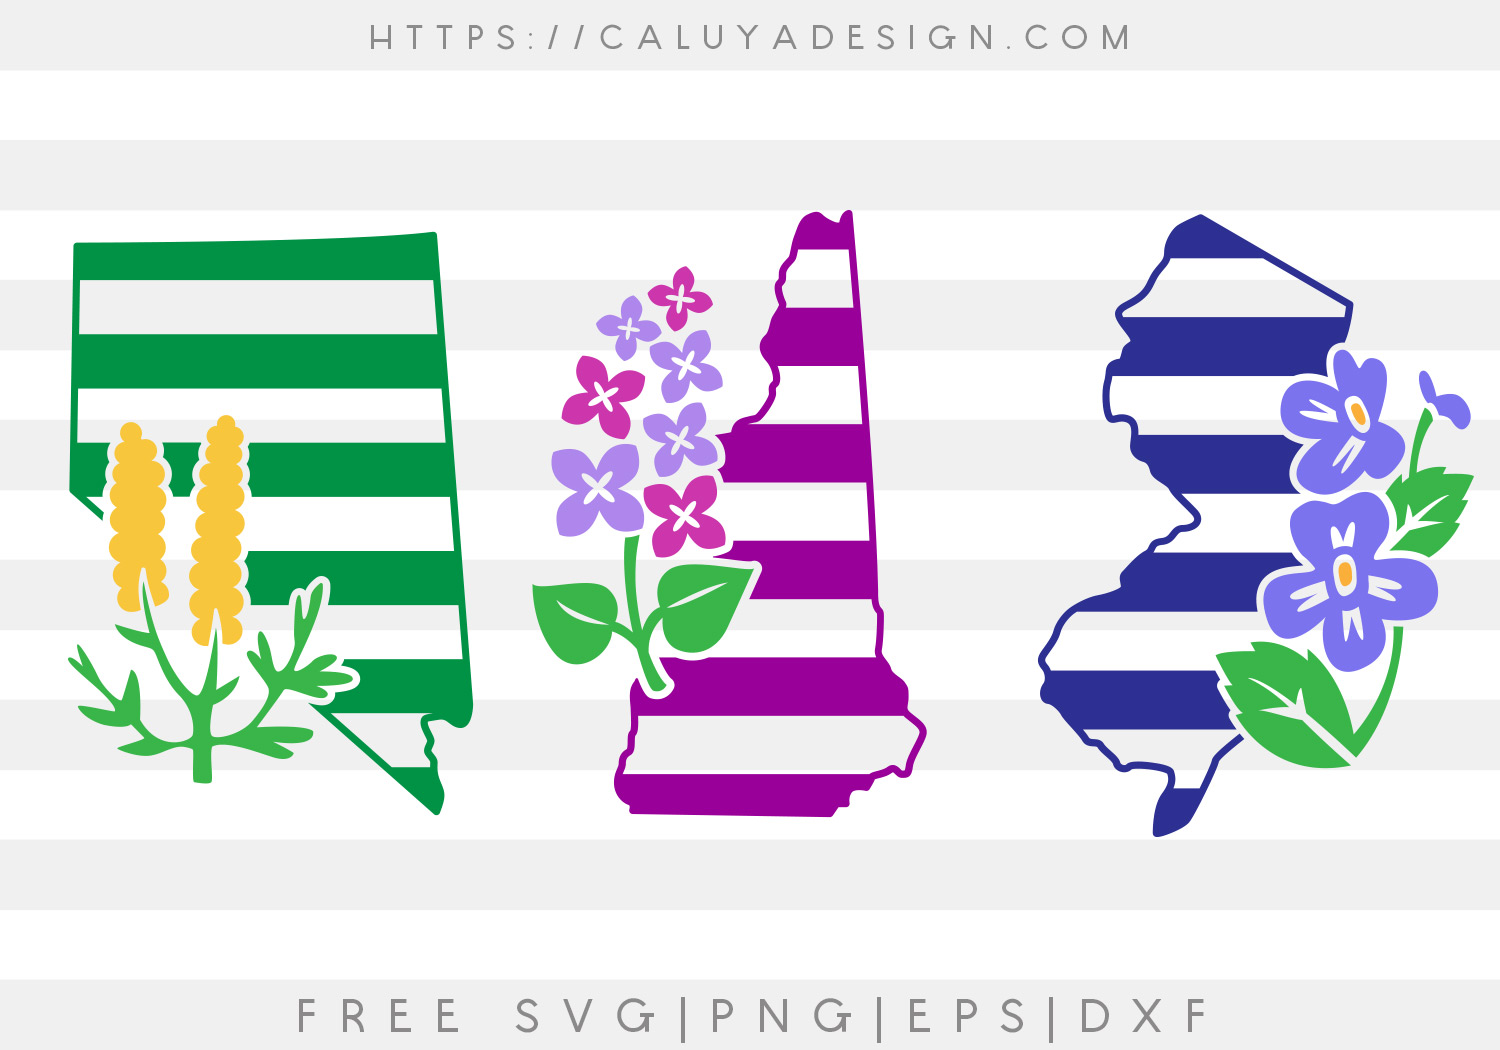 Free Nevada, New Hampshire and New Jersey SVG, PNG, EPS & DXF